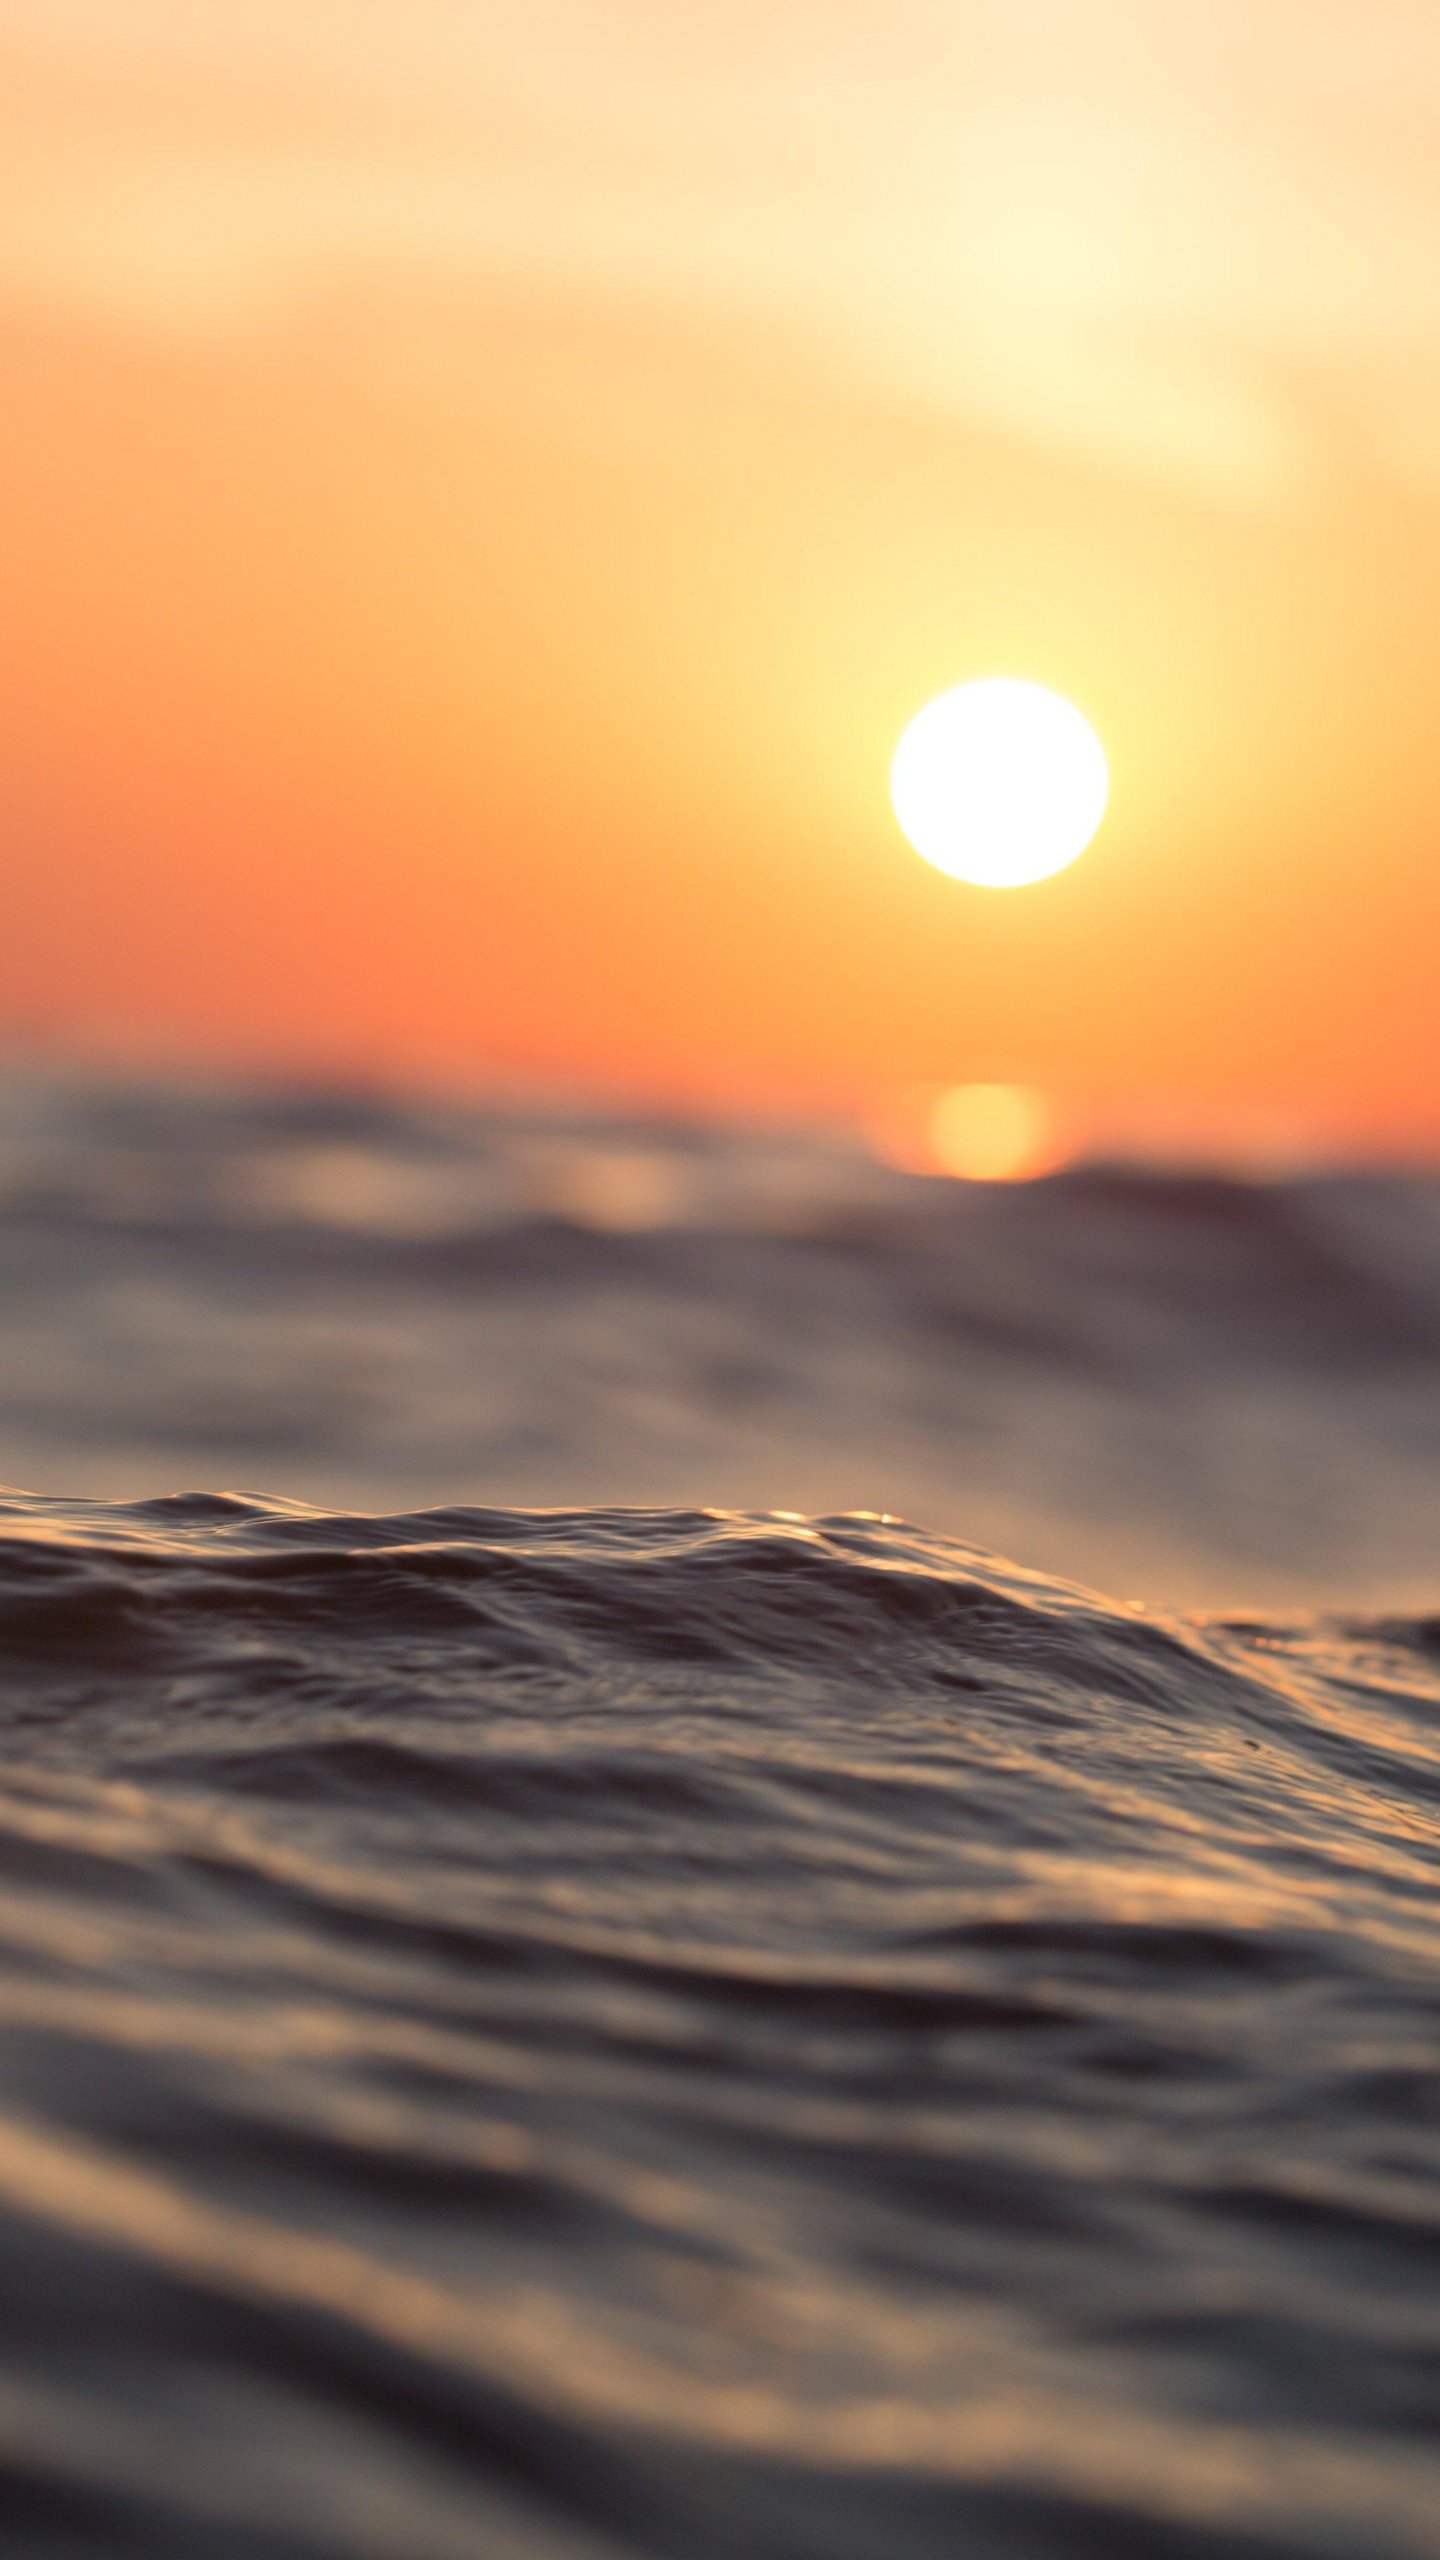 Water with Sun Wallpaper - iPhone, Android & Desktop Backgrounds